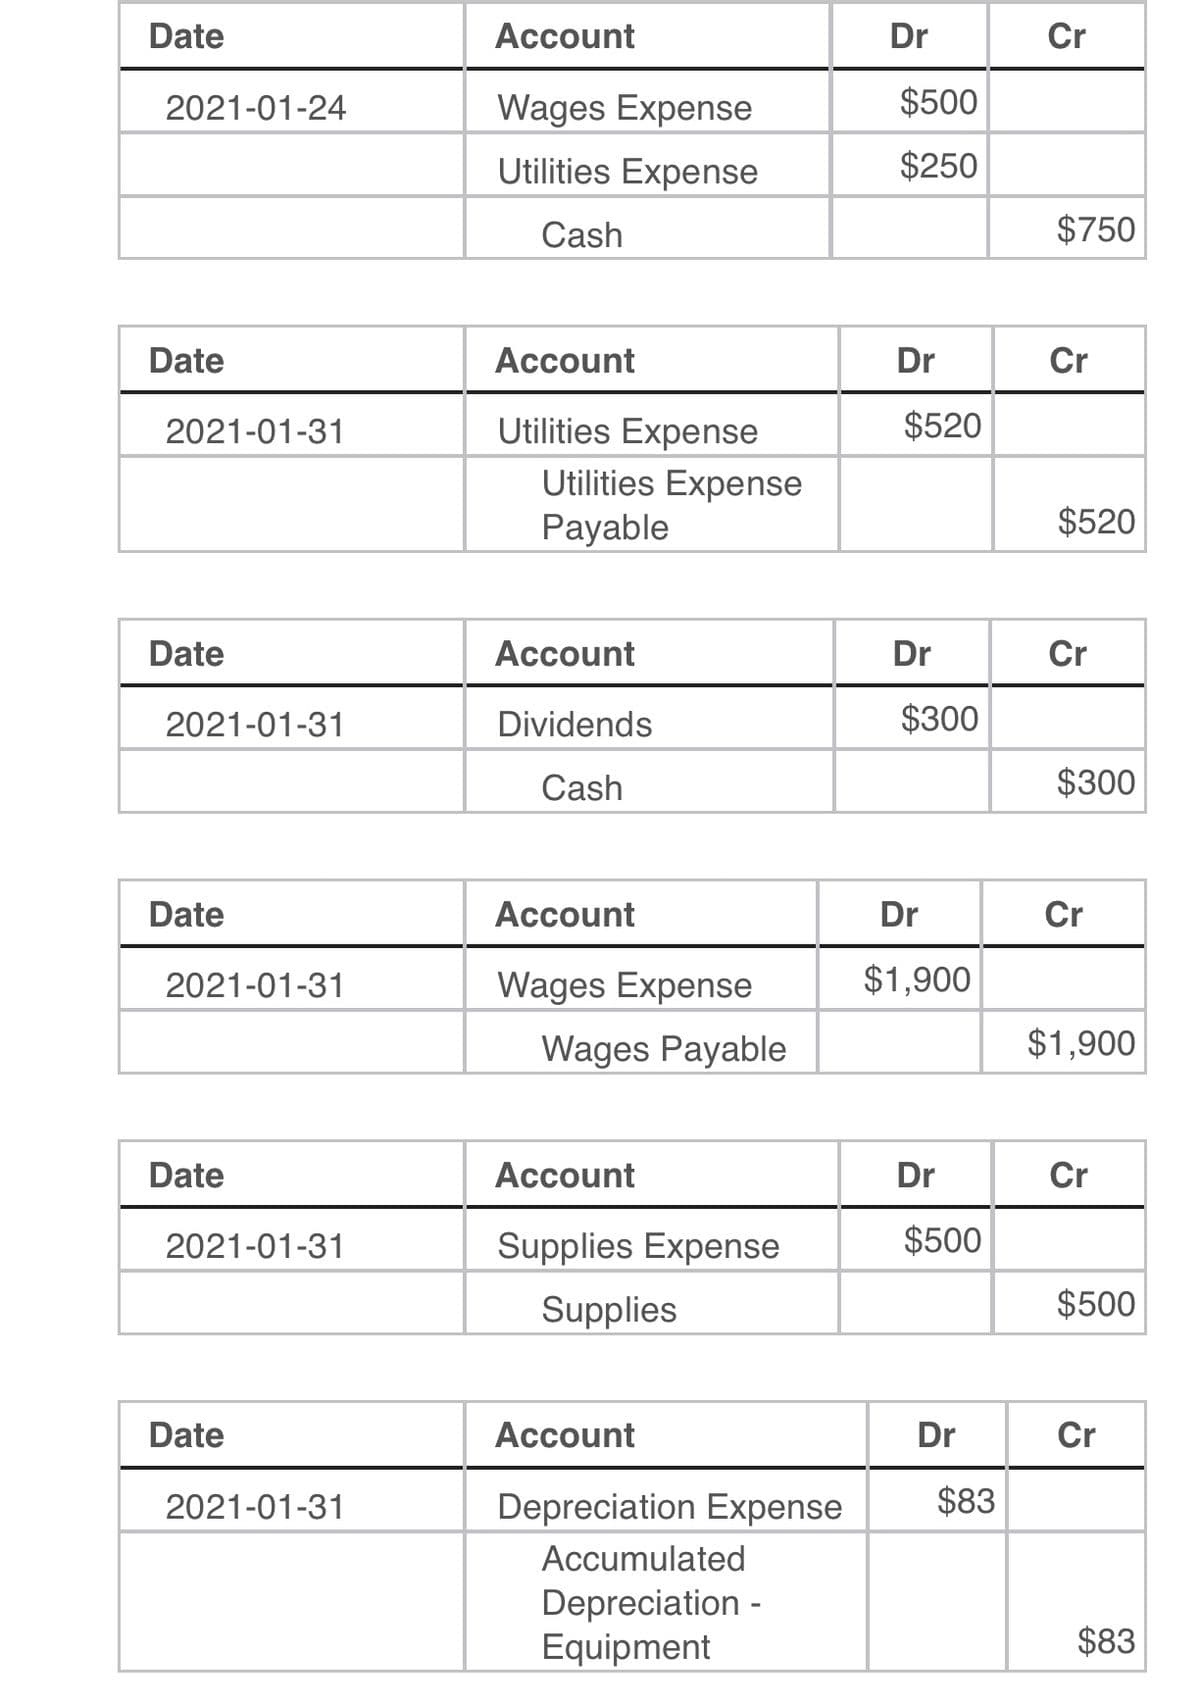 Date
Account
Dr
Cr
2021-01-24
Wages Expense
$500
Utilities Expense
$250
Cash
$750
Date
Account
Dr
Cr
2021-01-31
Utilities Expense
$520
Utilities Expense
Payable
$520
Date
Account
Dr
Cr
2021-01-31
Dividends
$300
Cash
$300
Date
Account
Dr
Cr
2021-01-31
Wages Expense
$1,900
Wages Payable
$1,900
Date
Account
Dr
Cr
2021-01-31
Supplies Expense
$500
Supplies
$500
Date
Account
Dr
Cr
2021-01-31
Depreciation Expense
$83
Accumulated
Depreciation -
Equipment
$83
